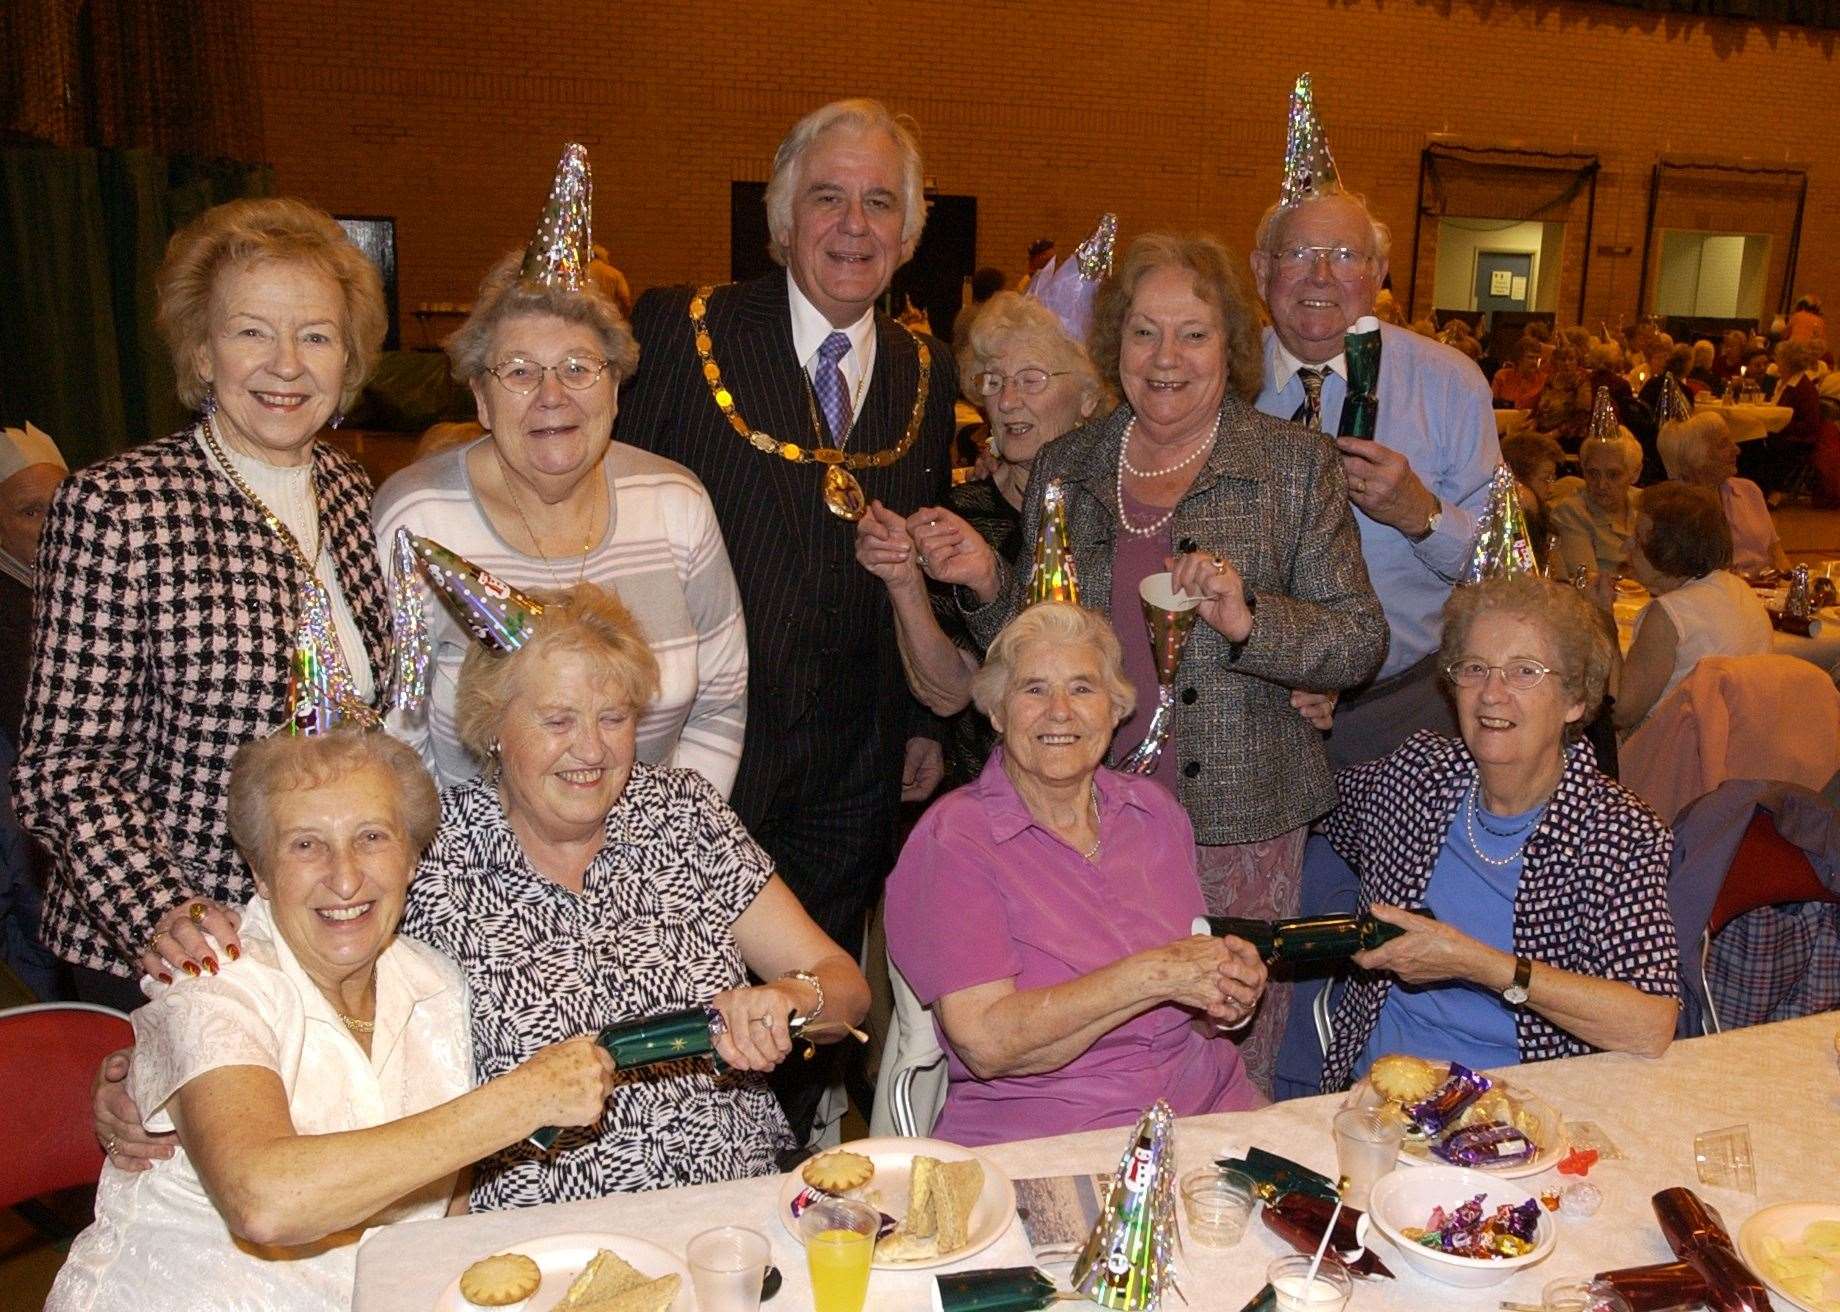 The then Mayor and Mayoress, Peter and Evelyn Homewood, join a senior citizens Christmas party at the Angel Centre in 2004